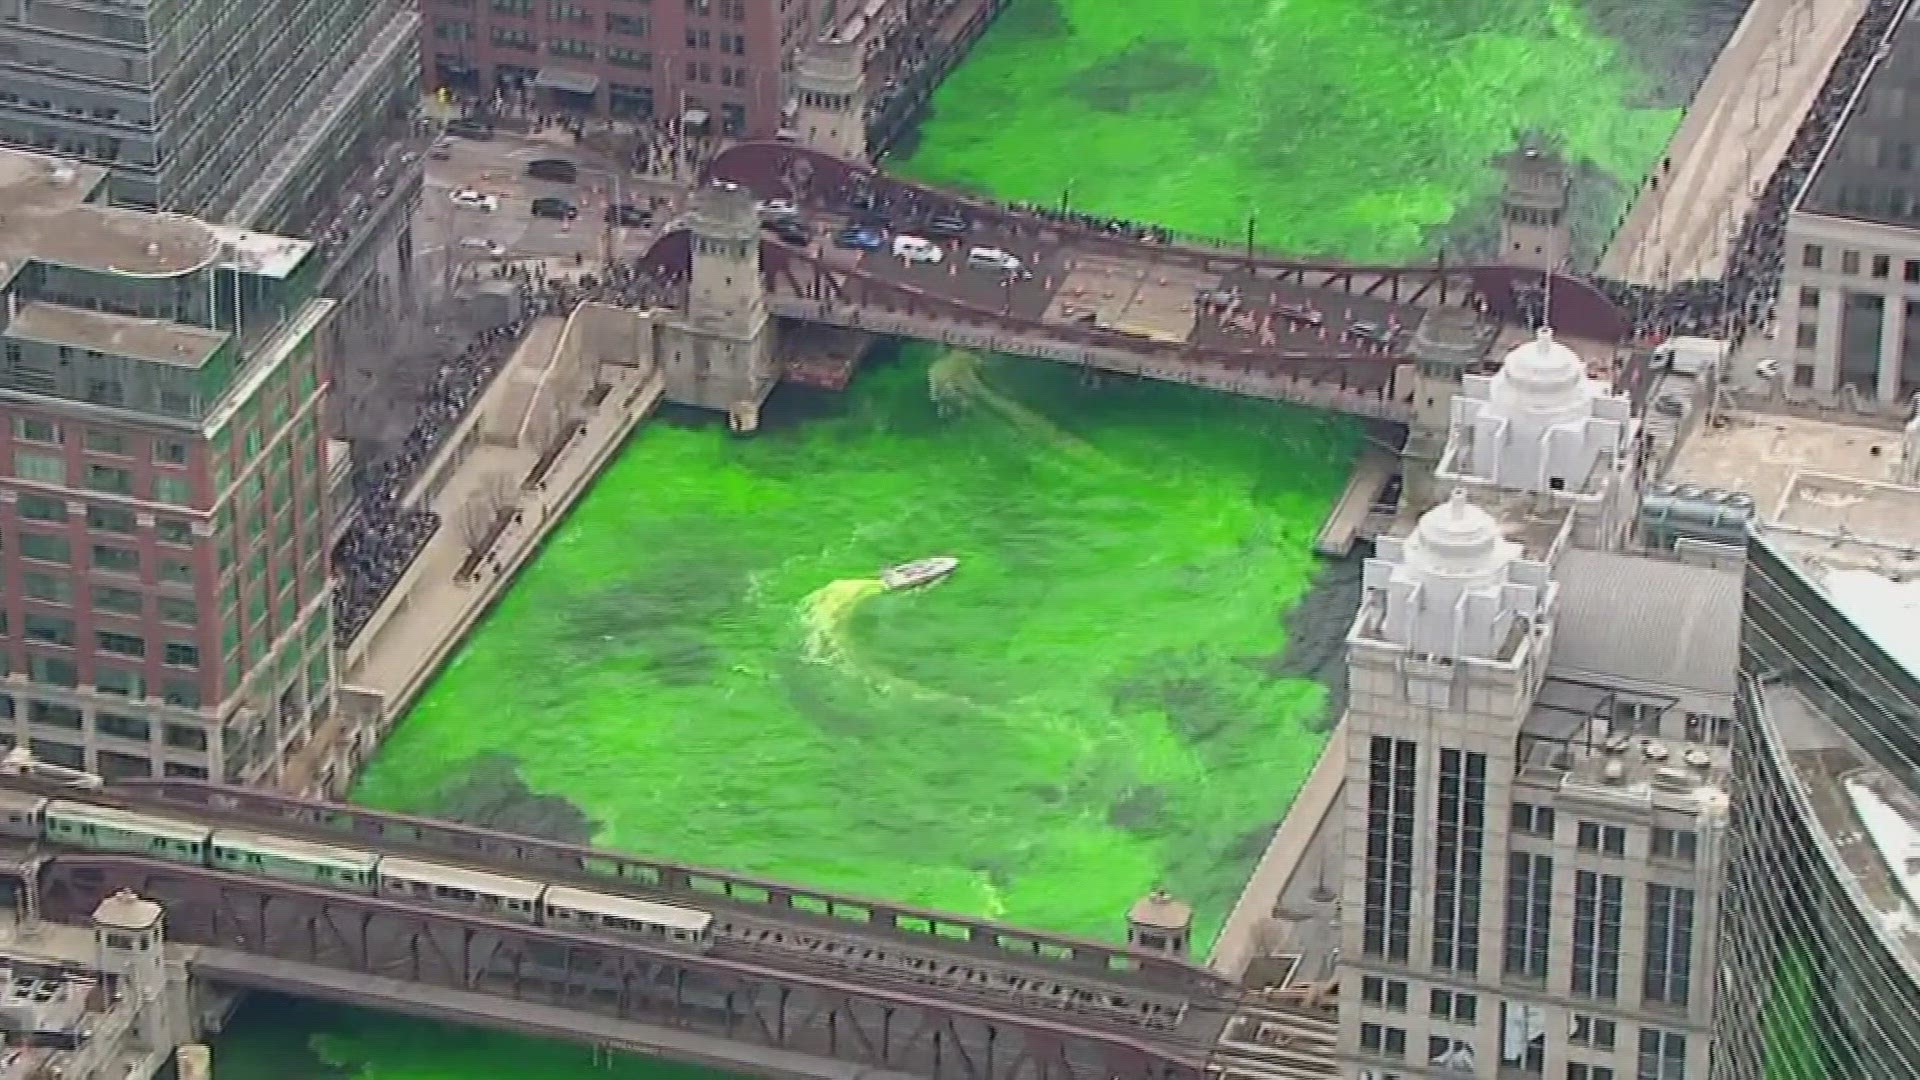 Watch as boats add dye to turn the Chicago River green for St. Patrick's Day!